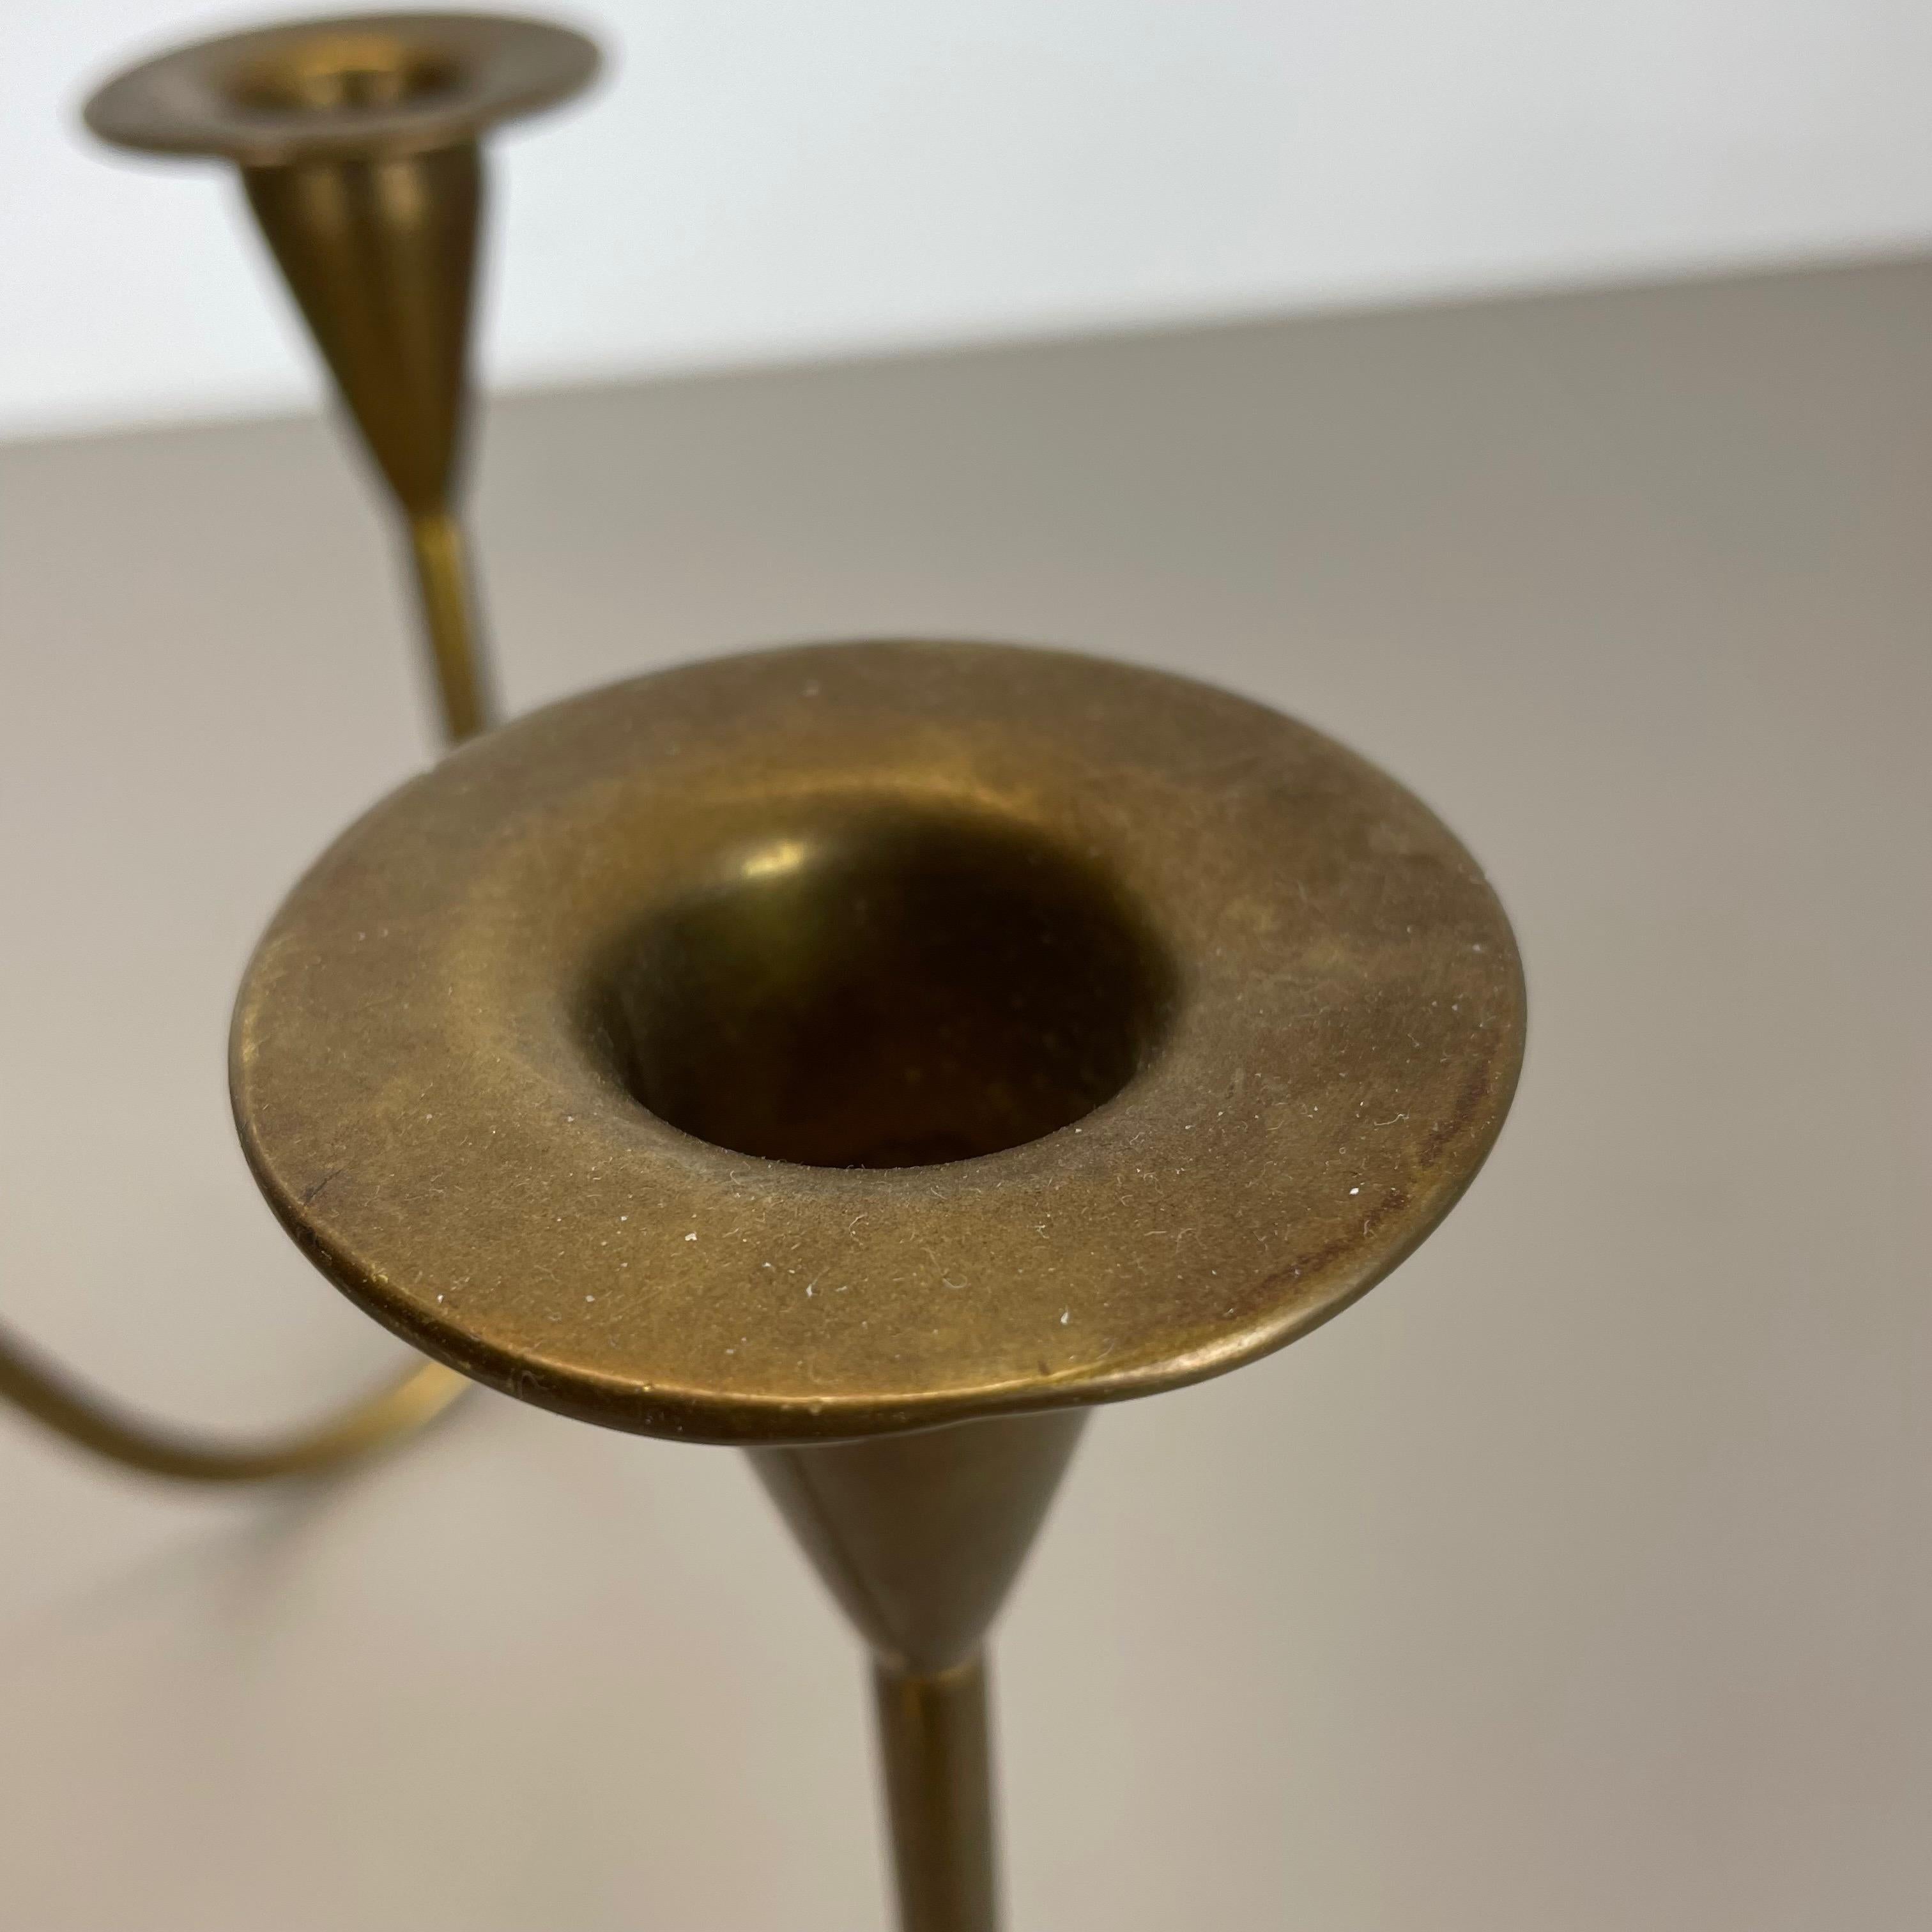 Sculptural Brass Candleholder Object by Günter Kupetz for WMF, Germany 1950s For Sale 8